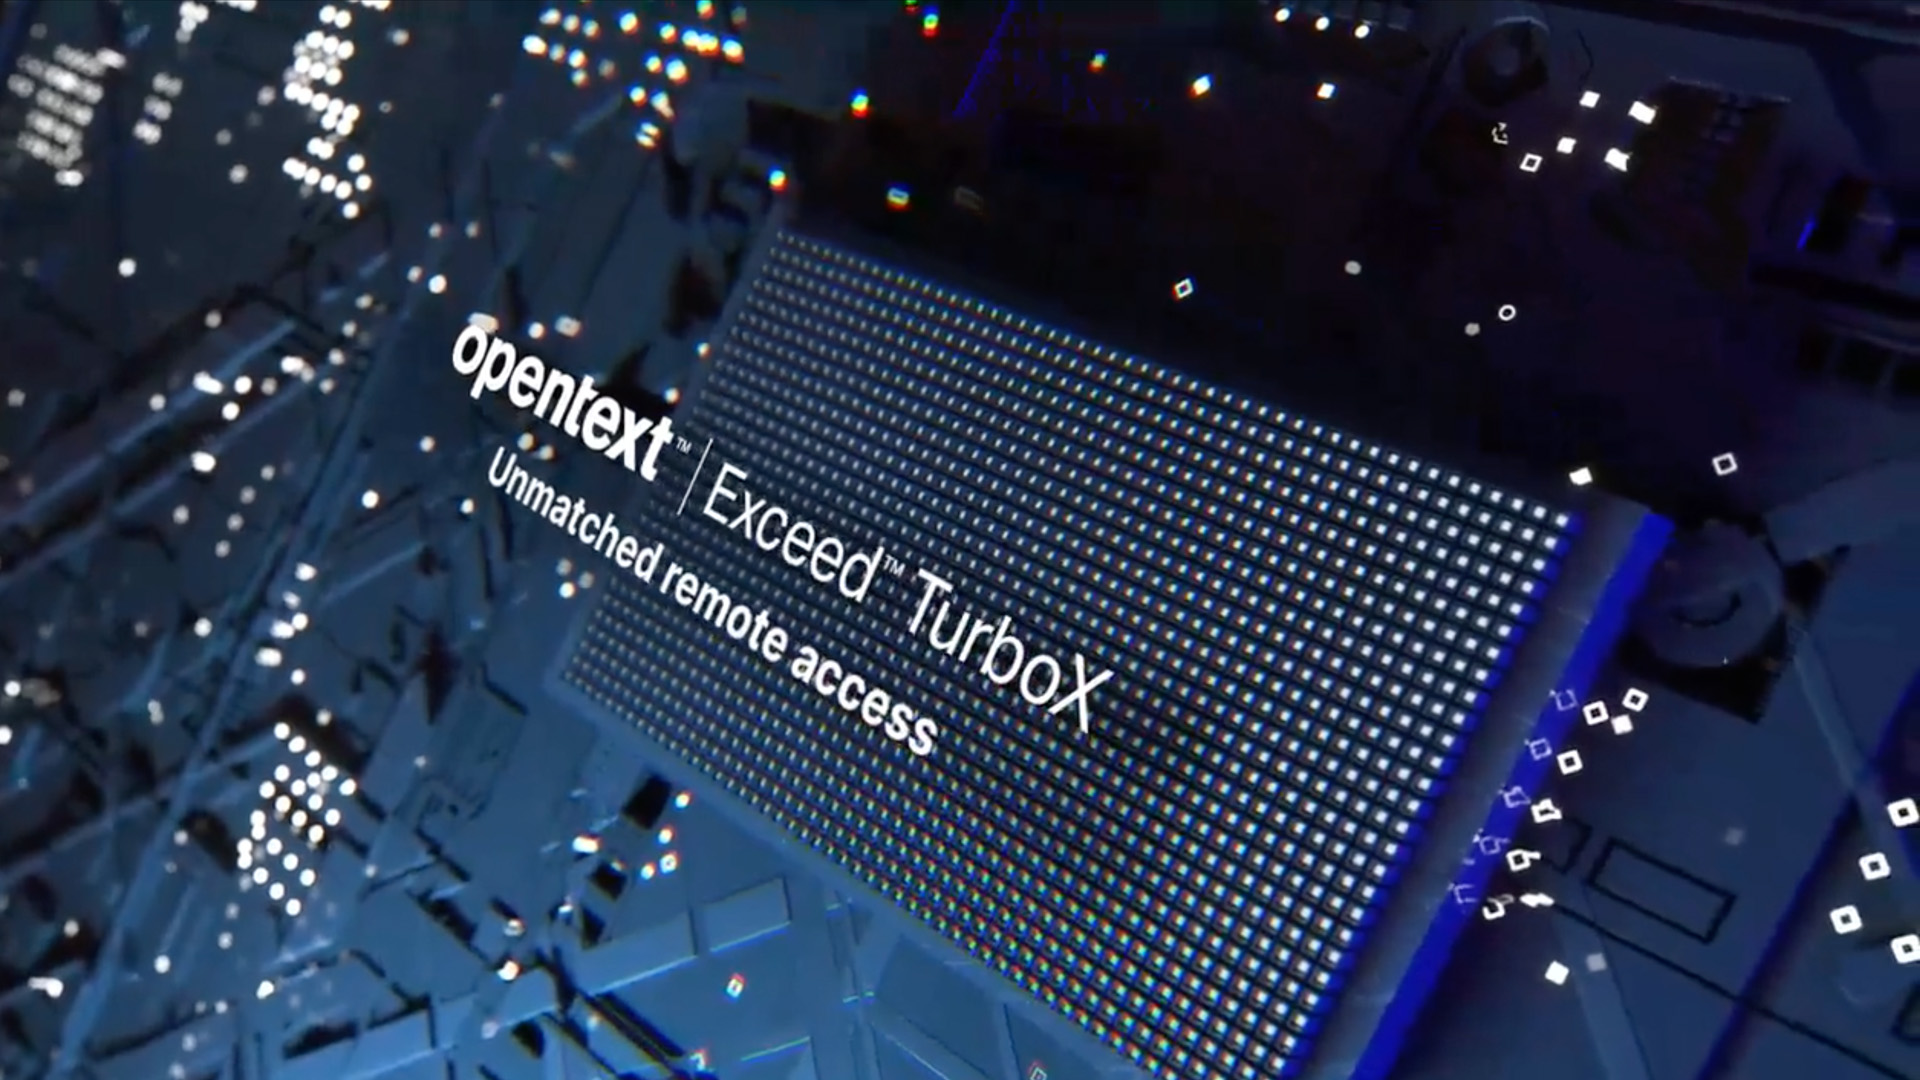 A still image from the OpenText Exceed TurboX campaign.